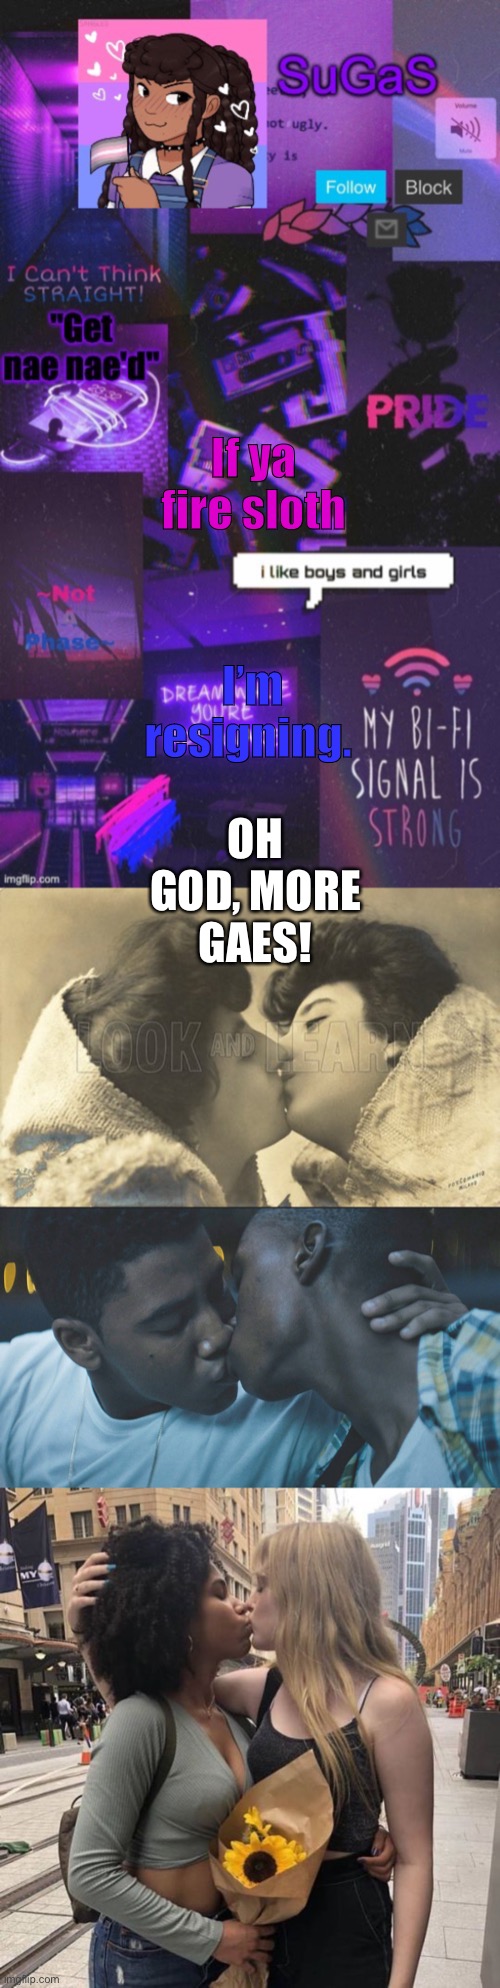 God forbid! Let’s censor it! | If ya fire sloth; OH GOD, MORE GAES! I’m resigning. | image tagged in sugas' bi-demigirl temp twinned with bored_knox | made w/ Imgflip meme maker